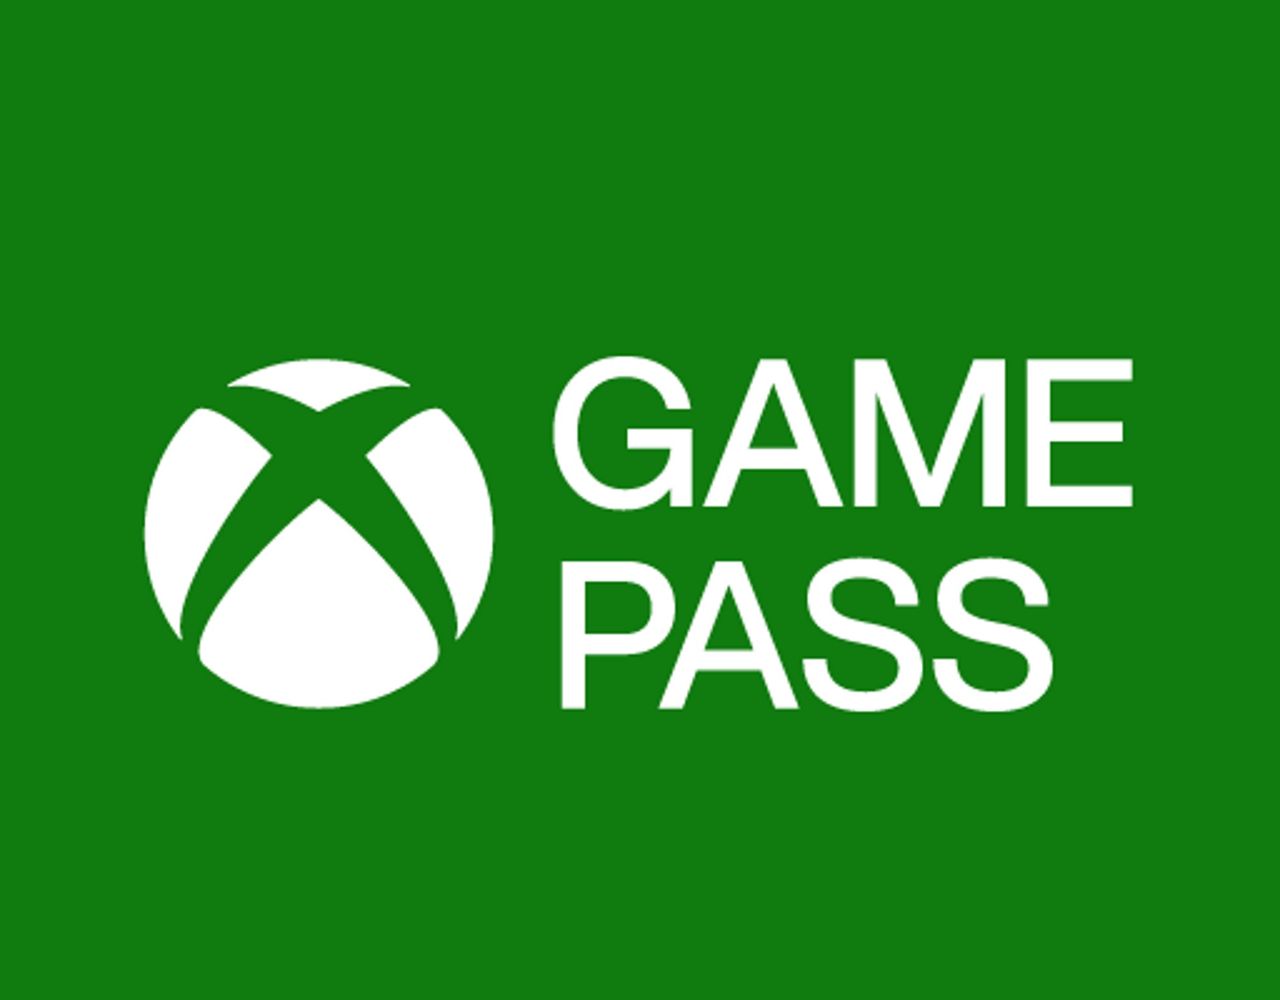 Activision Blizzard games in Xbox Game Pass. Finally, there are specifics